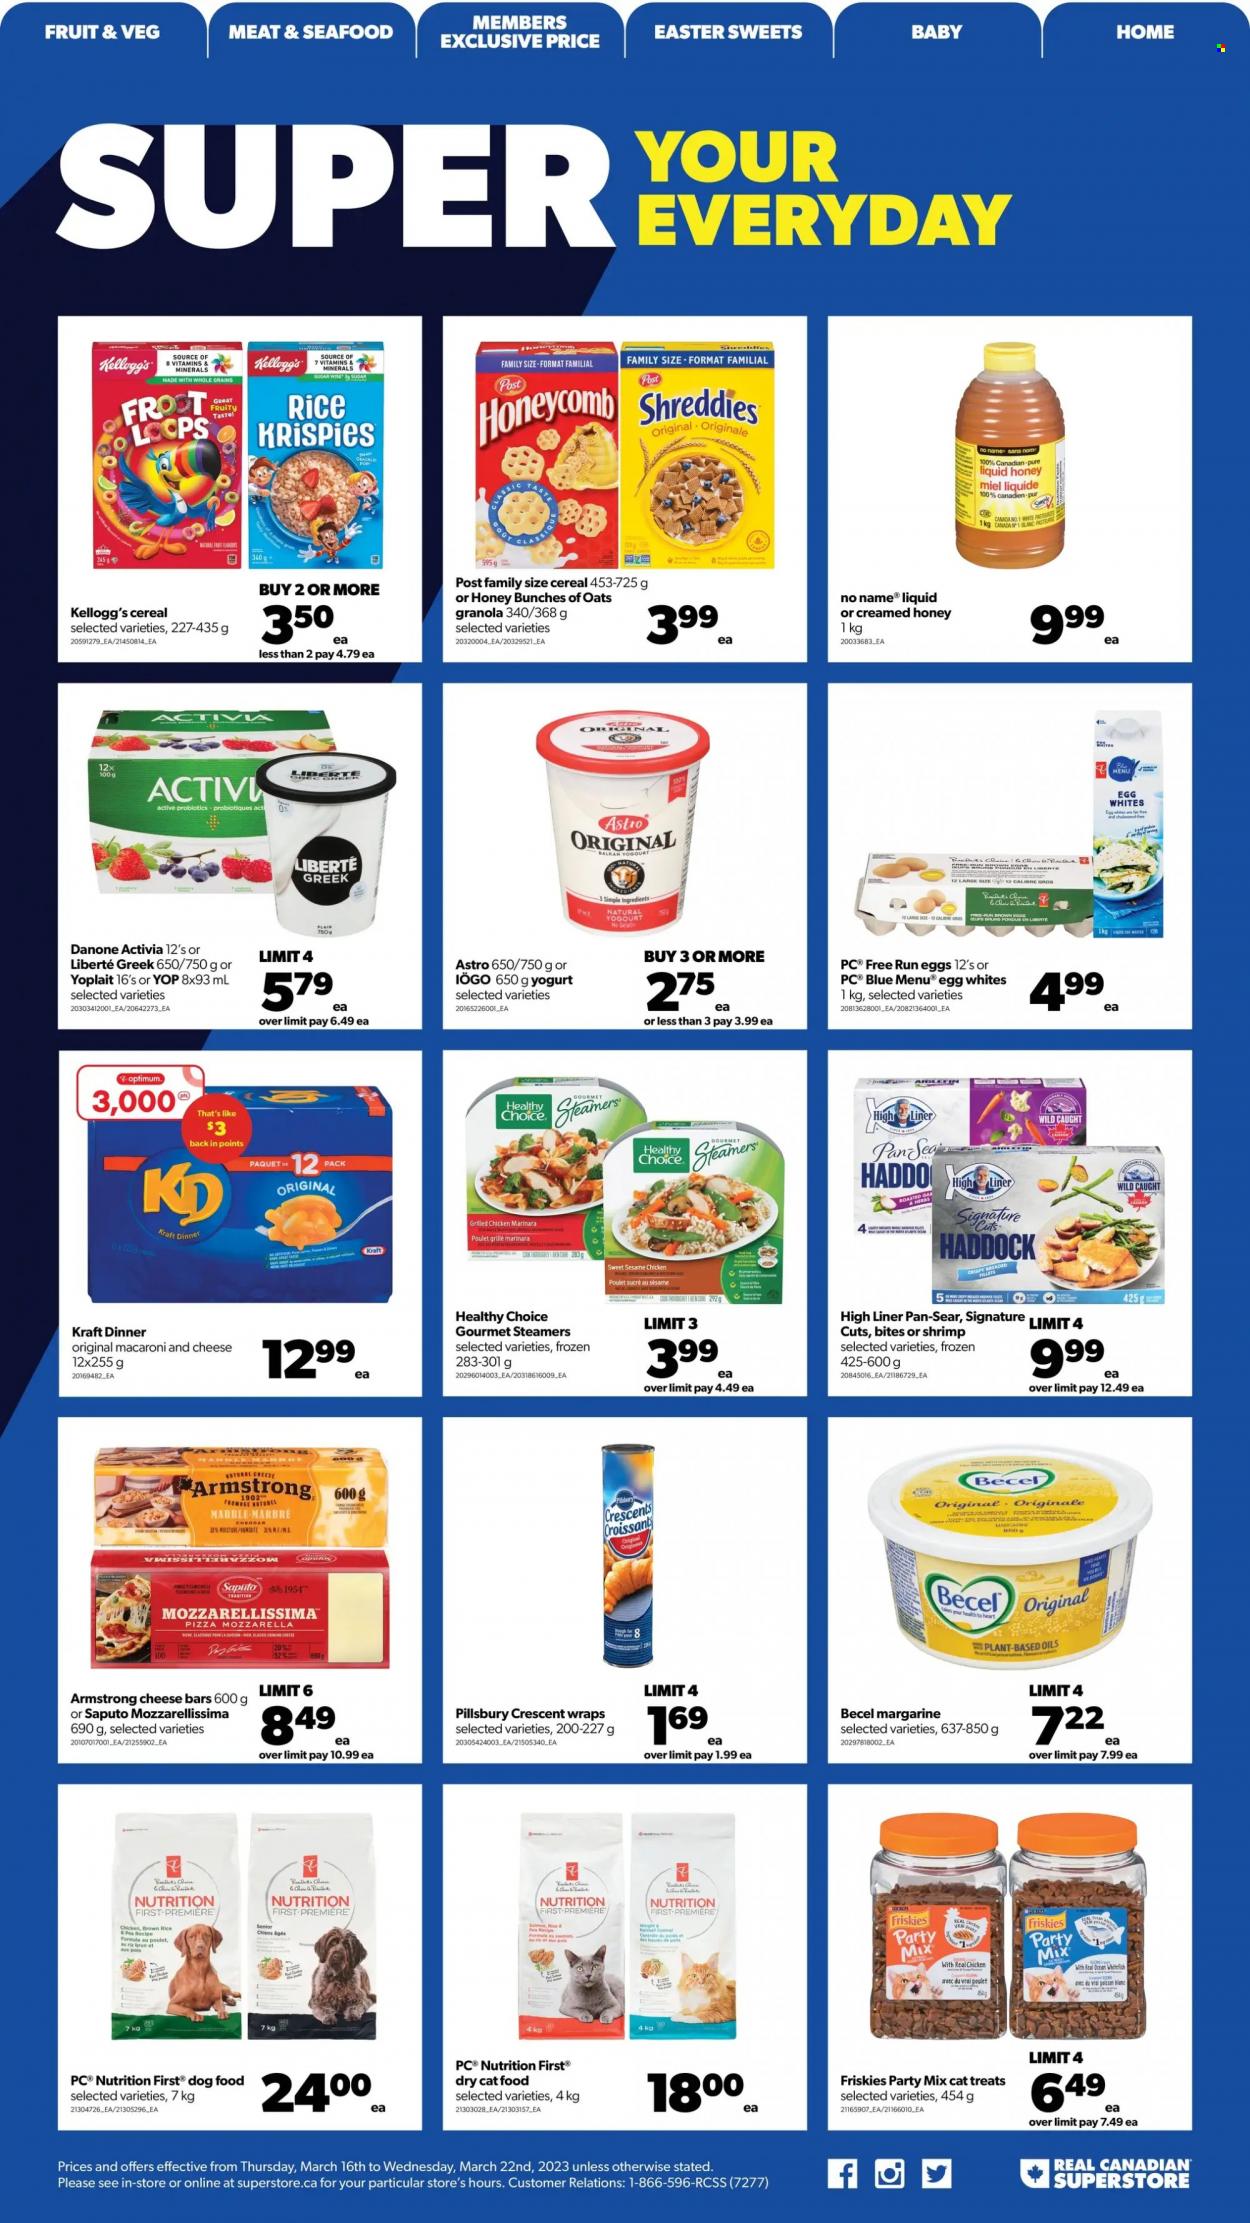 thumbnail - Real Canadian Superstore Flyer - March 16, 2023 - March 22, 2023 - Sales products - croissant, wraps, haddock, shrimps, No Name, macaroni & cheese, pizza, Pillsbury, Healthy Choice, Kraft®, cheddar, yoghurt, Activia, Yoplait, eggs, margarine, Kellogg's, cereals, Rice Krispies, brown rice, pan, cup, animal food, PREMIERE, cat food, dog food, Optimum, dry cat food, Friskies, gelatin, probiotics, granola, Danone. Page 12.